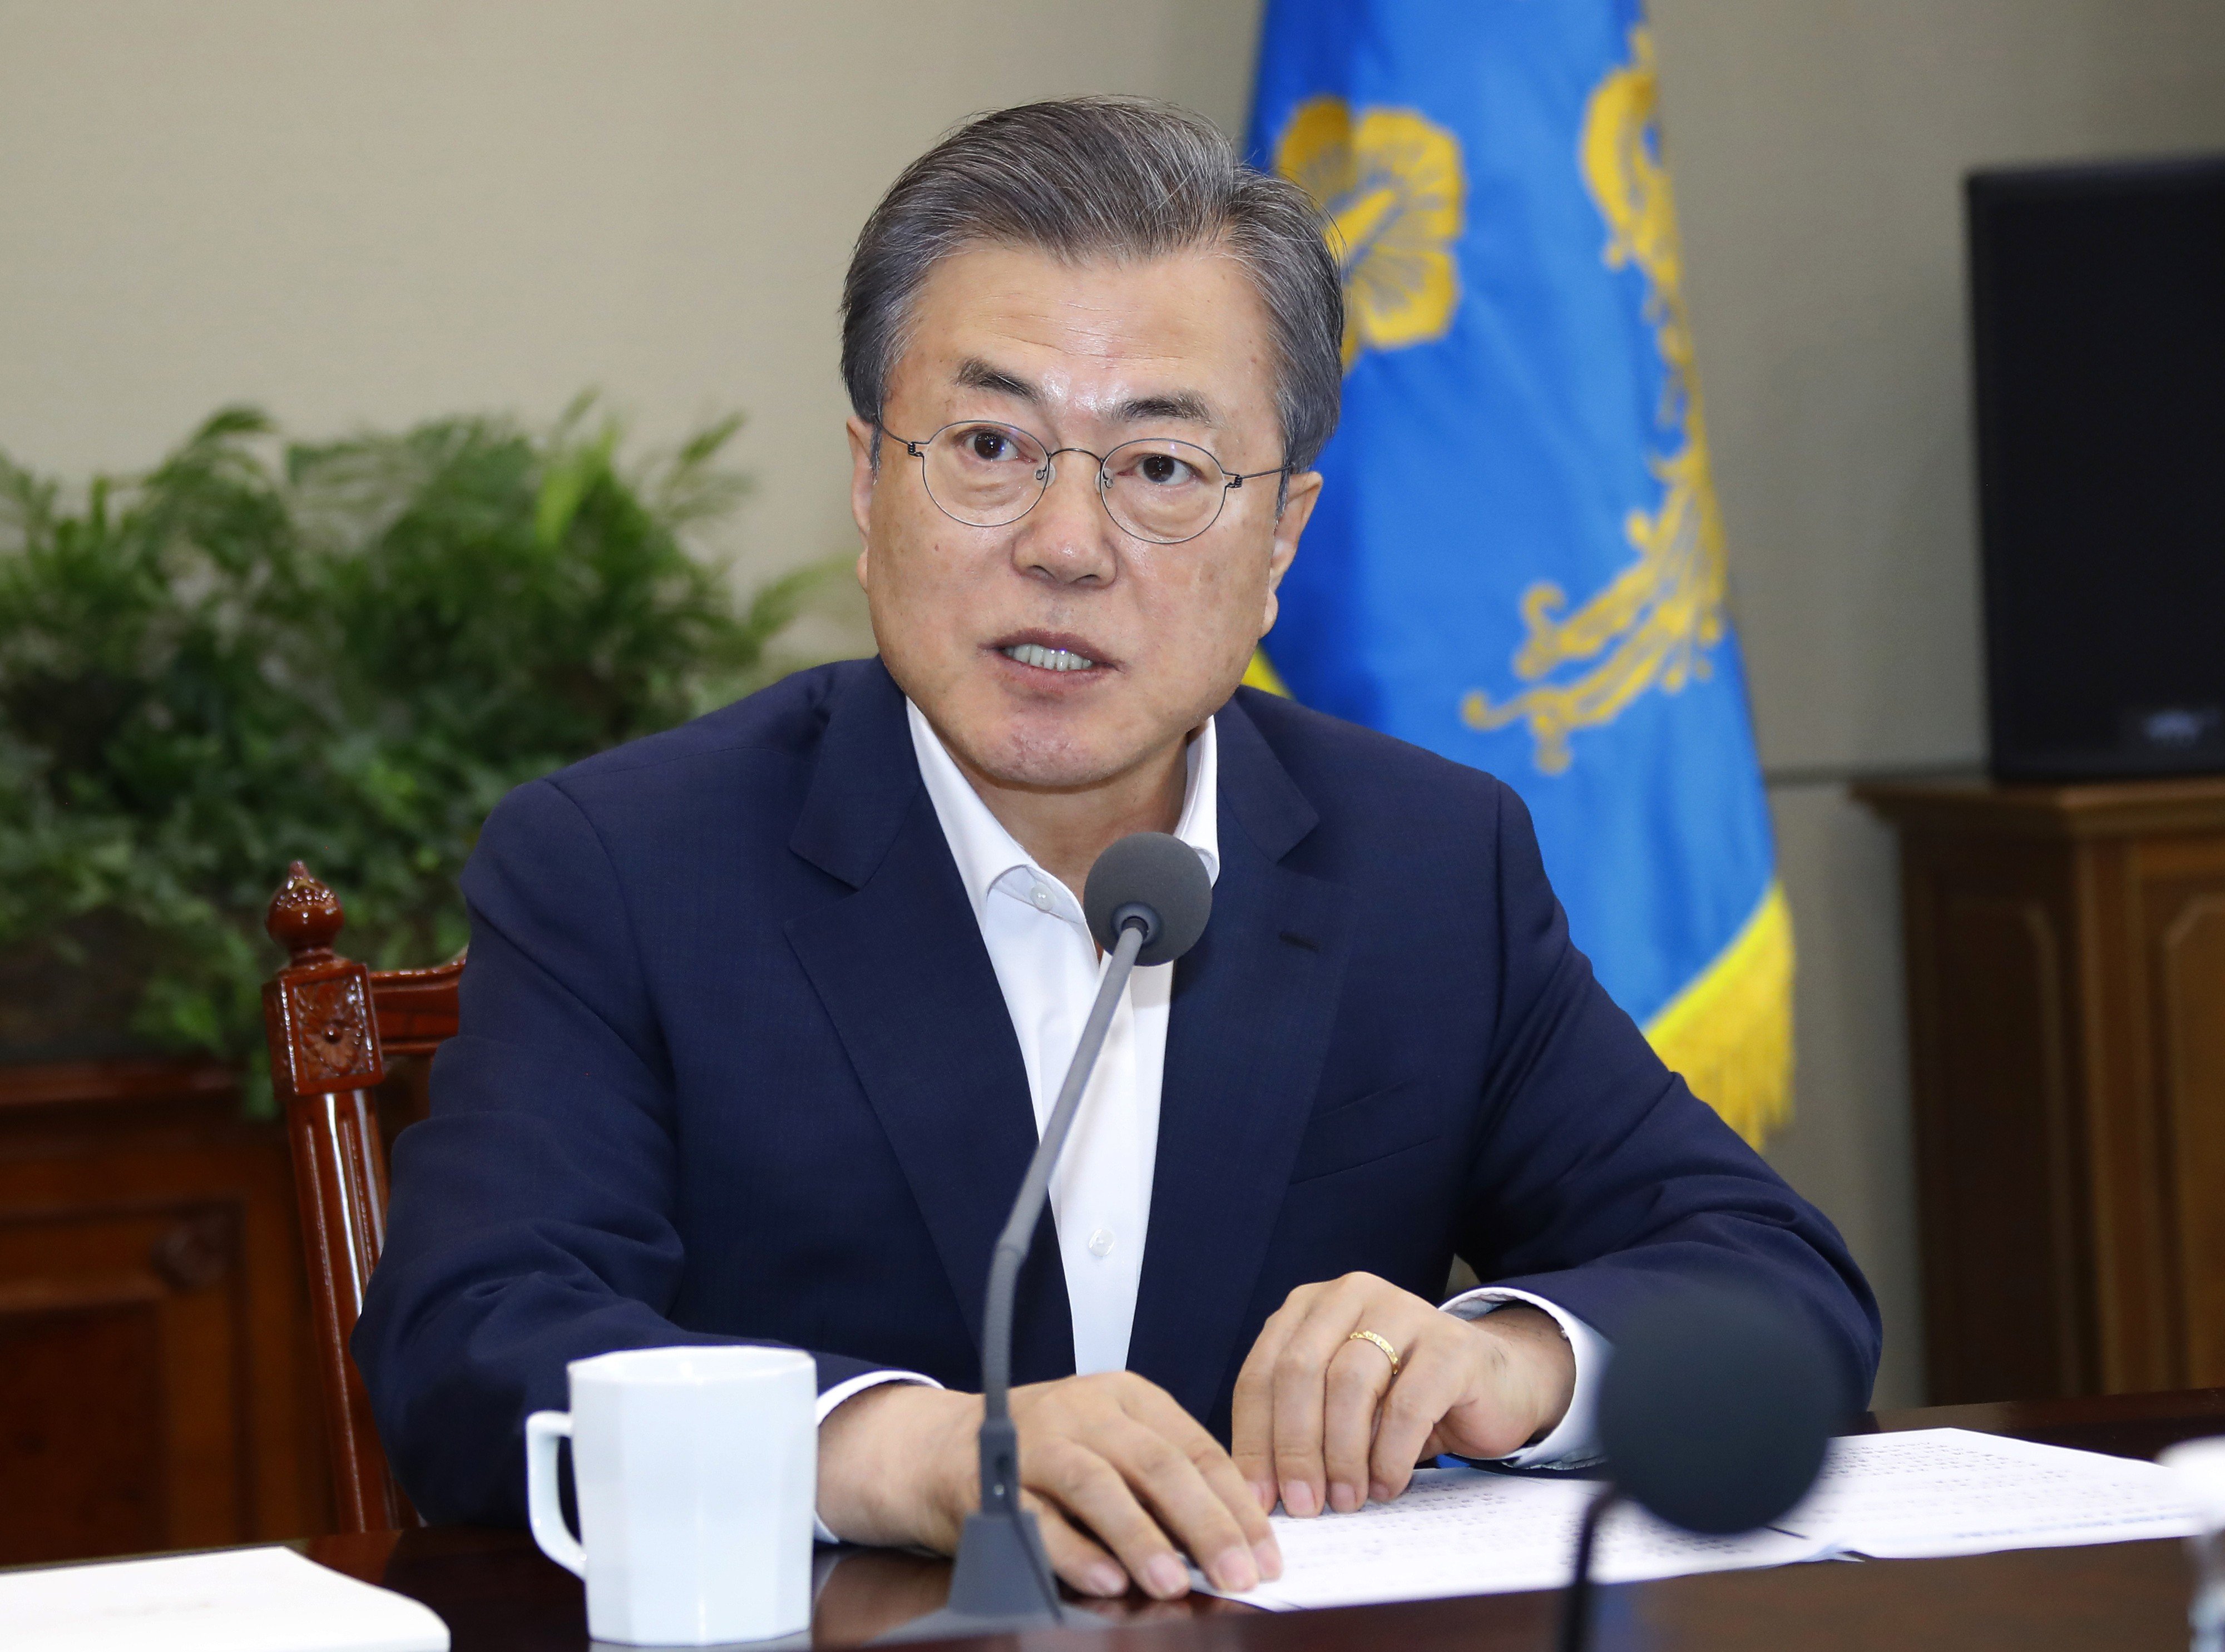 With the South Korean economy contracting in the first quarter of 2019 and the negotiations process with North Korea stymied, critics say President Moon Jae-in is now moving to silence criticism in other ways. Photo: Yonhap via AP